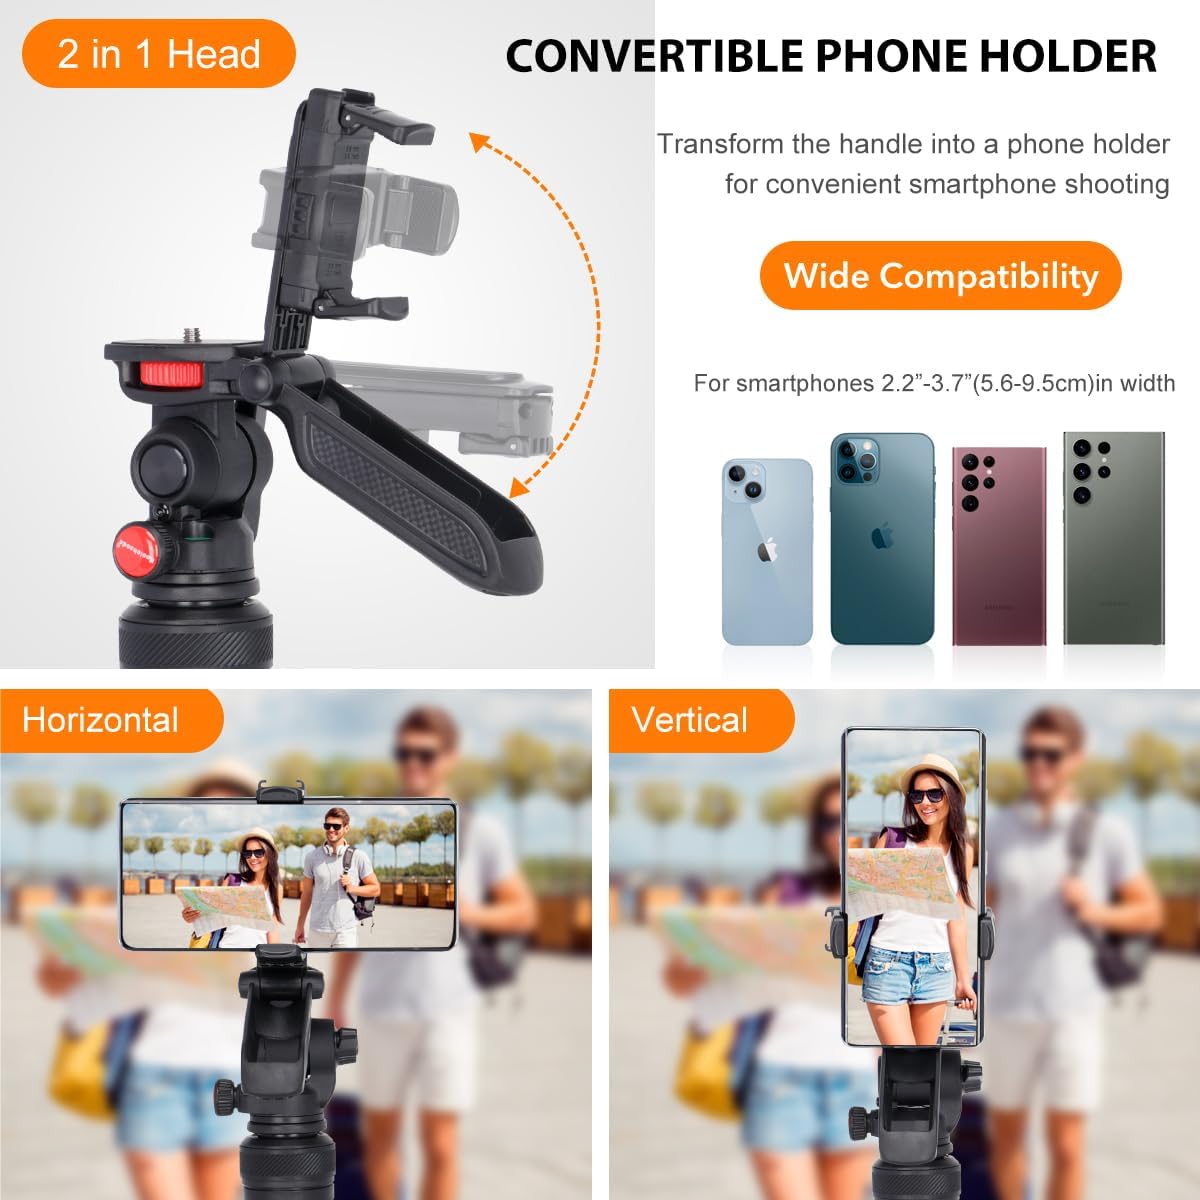 55" Phone Tripod Aluminum Extendable Travel Tripod with 360° Pan & Tilt/Phone Holder for Mirrorless/DSLR Camera/Phone, Max Load 6.6 Lbs